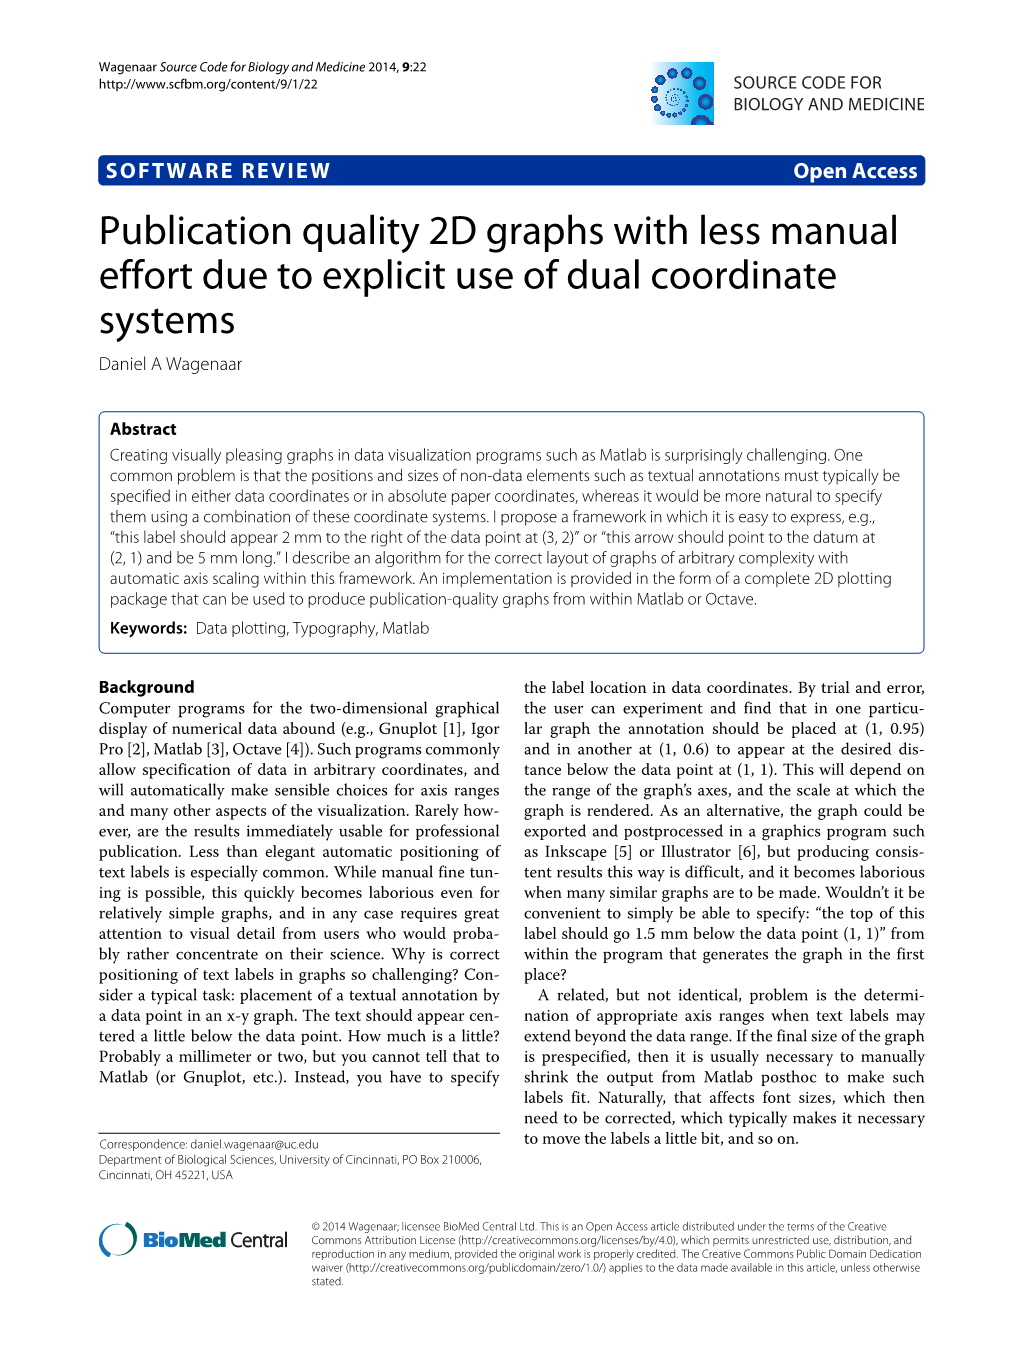 Publication Quality 2D Graphs with Less Manual Effort Due to Explicit Use of Dual Coordinate Systems Daniel a Wagenaar